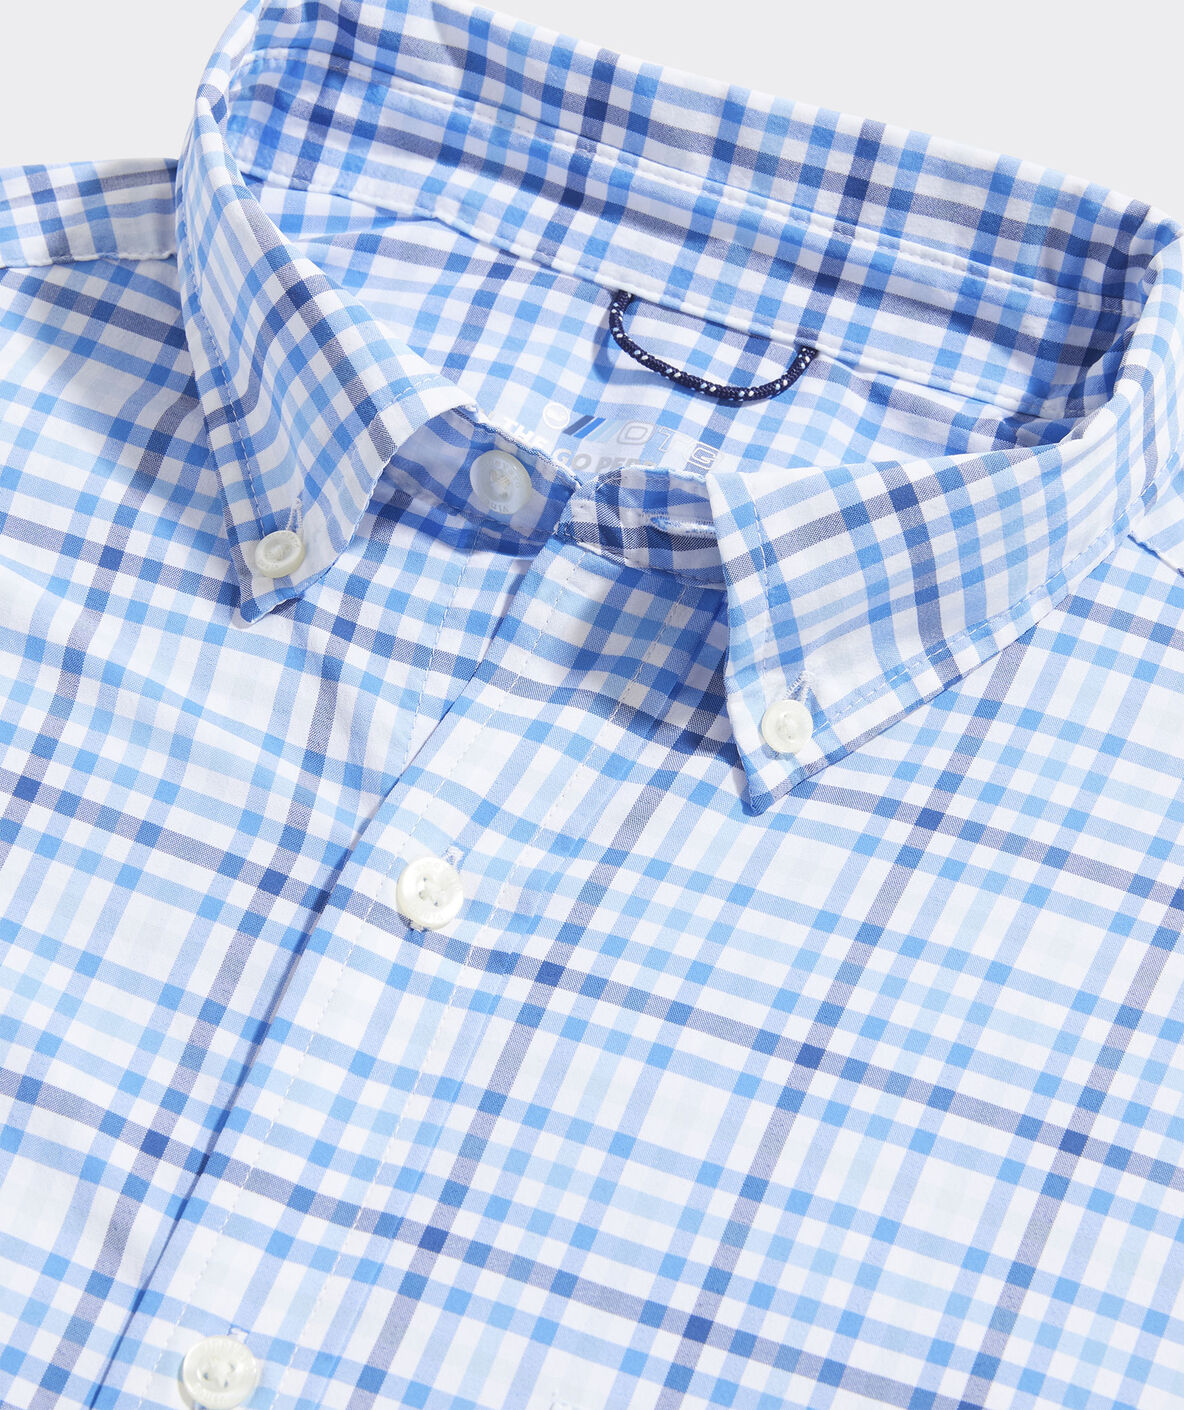 On-The-Go Lightweight Check Shirt - Captains Blue